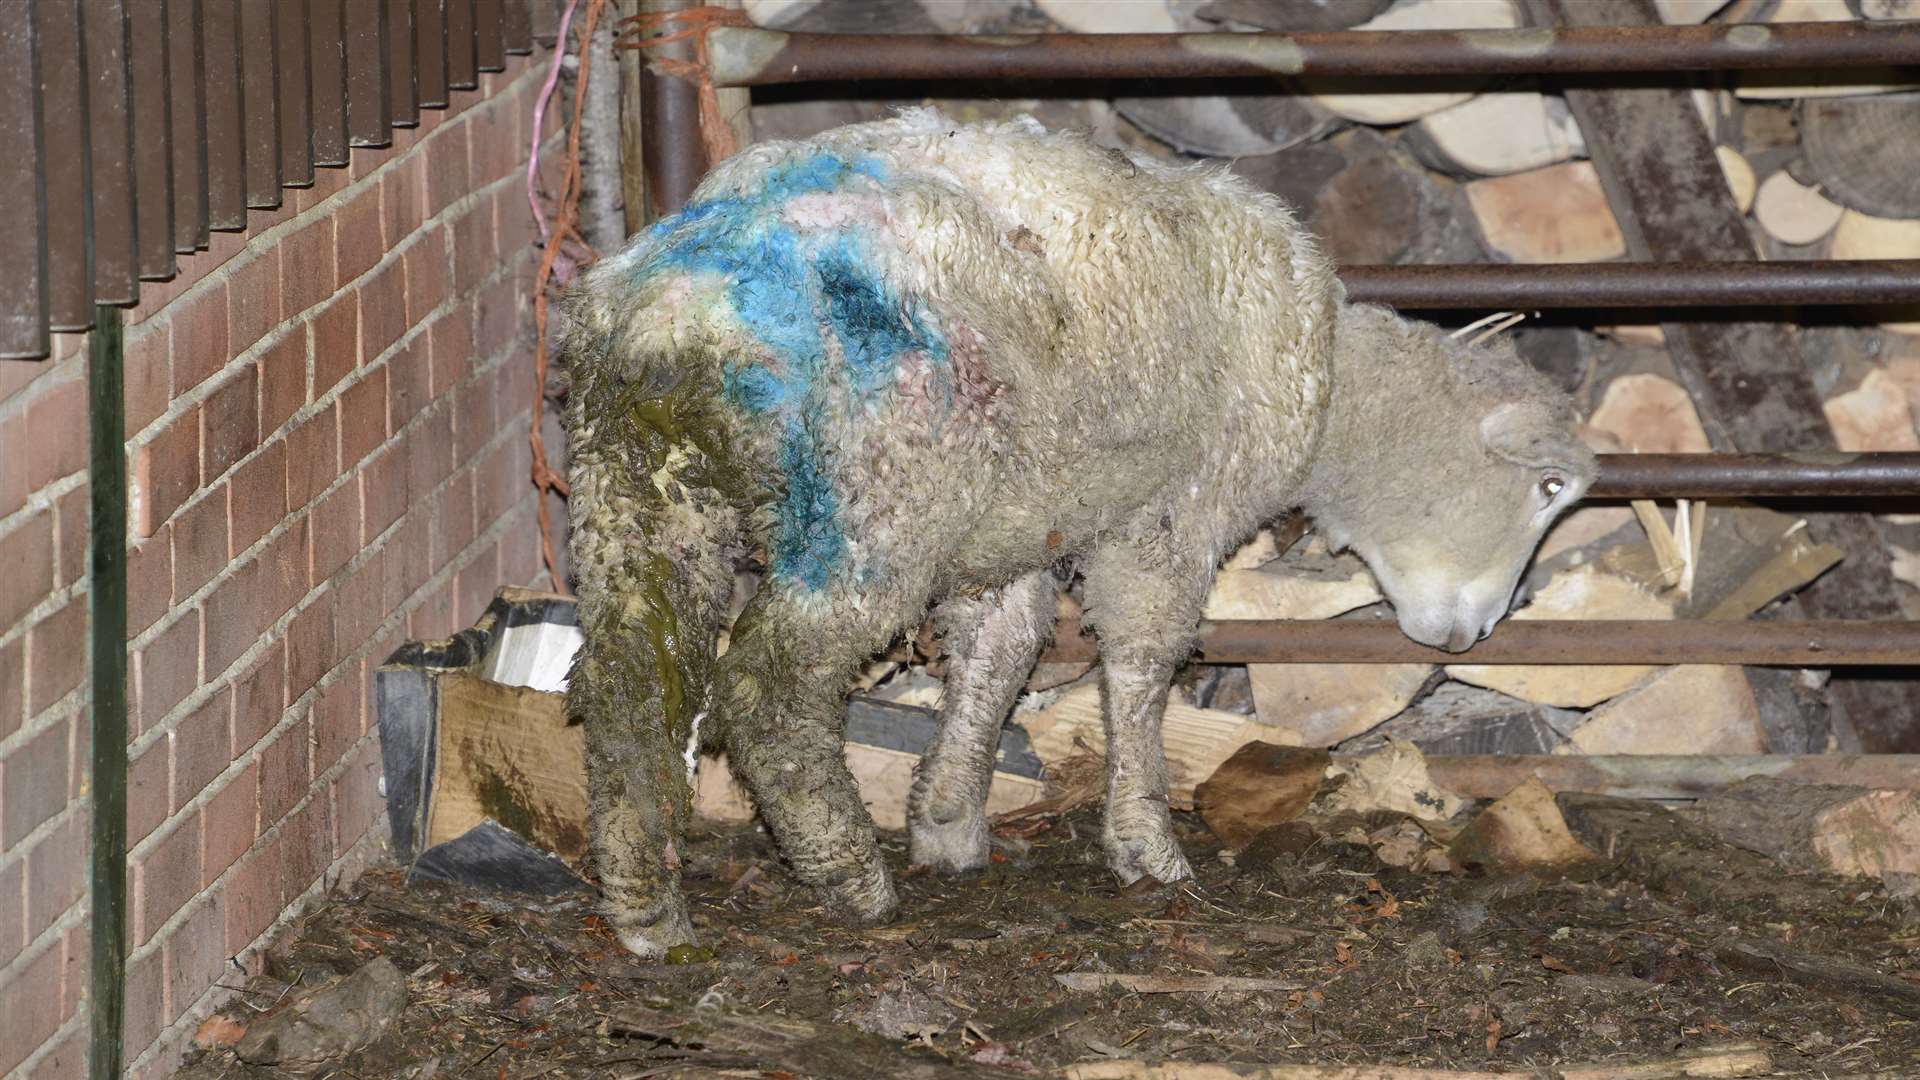 A sickly sheep after the attack